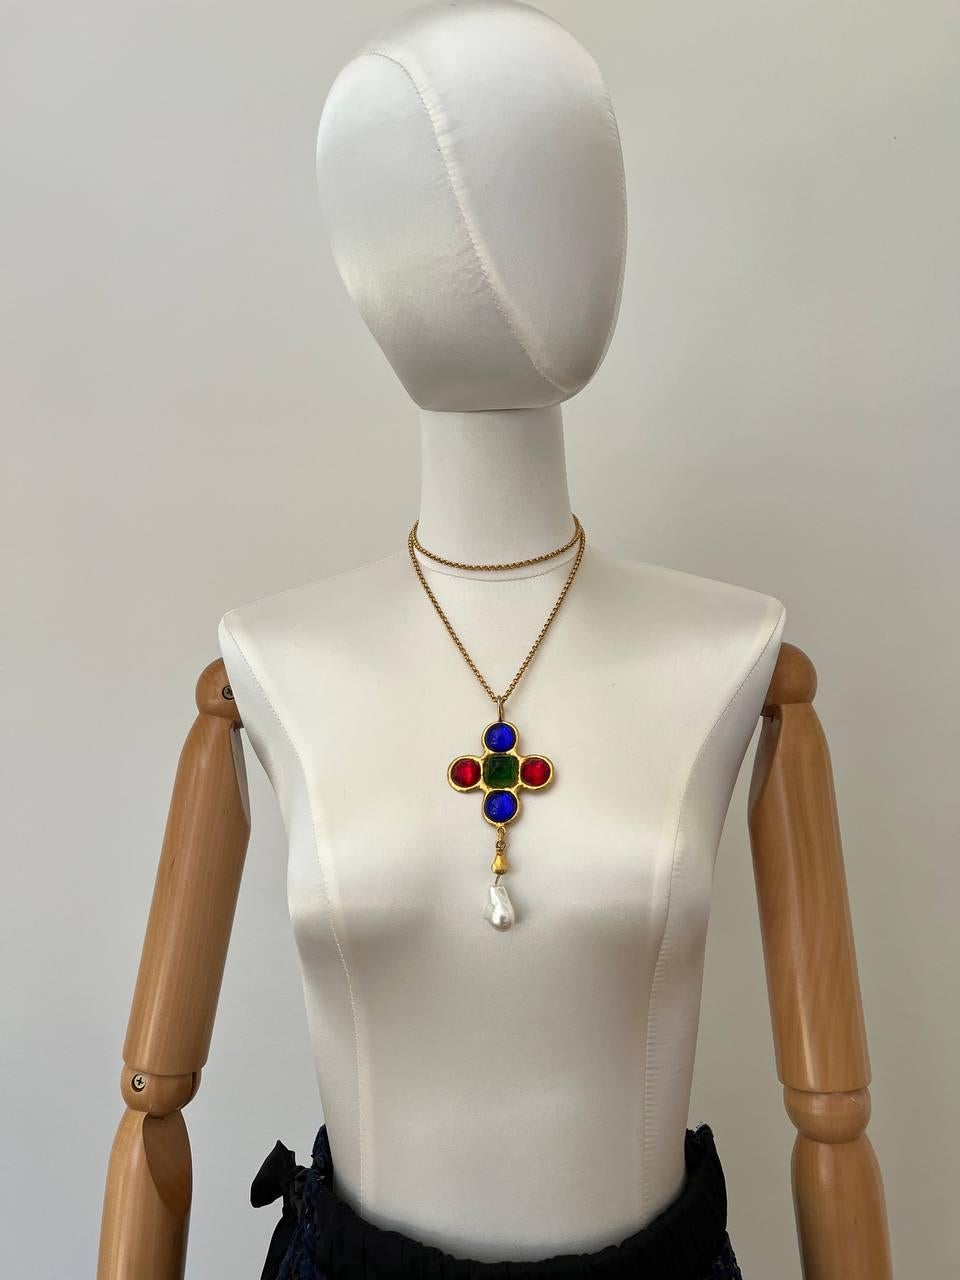 Vintage Byzantine style Yves Saint Laurent pendant featuring cross and dangling Baroque pearl. Decorated with blue, red, green cabochons. 
Signed. Yves Saint Laurent.Rive Gauche. Made in France
Period: 1980s
Pendant length: 11cm
Chain length: 50 cm